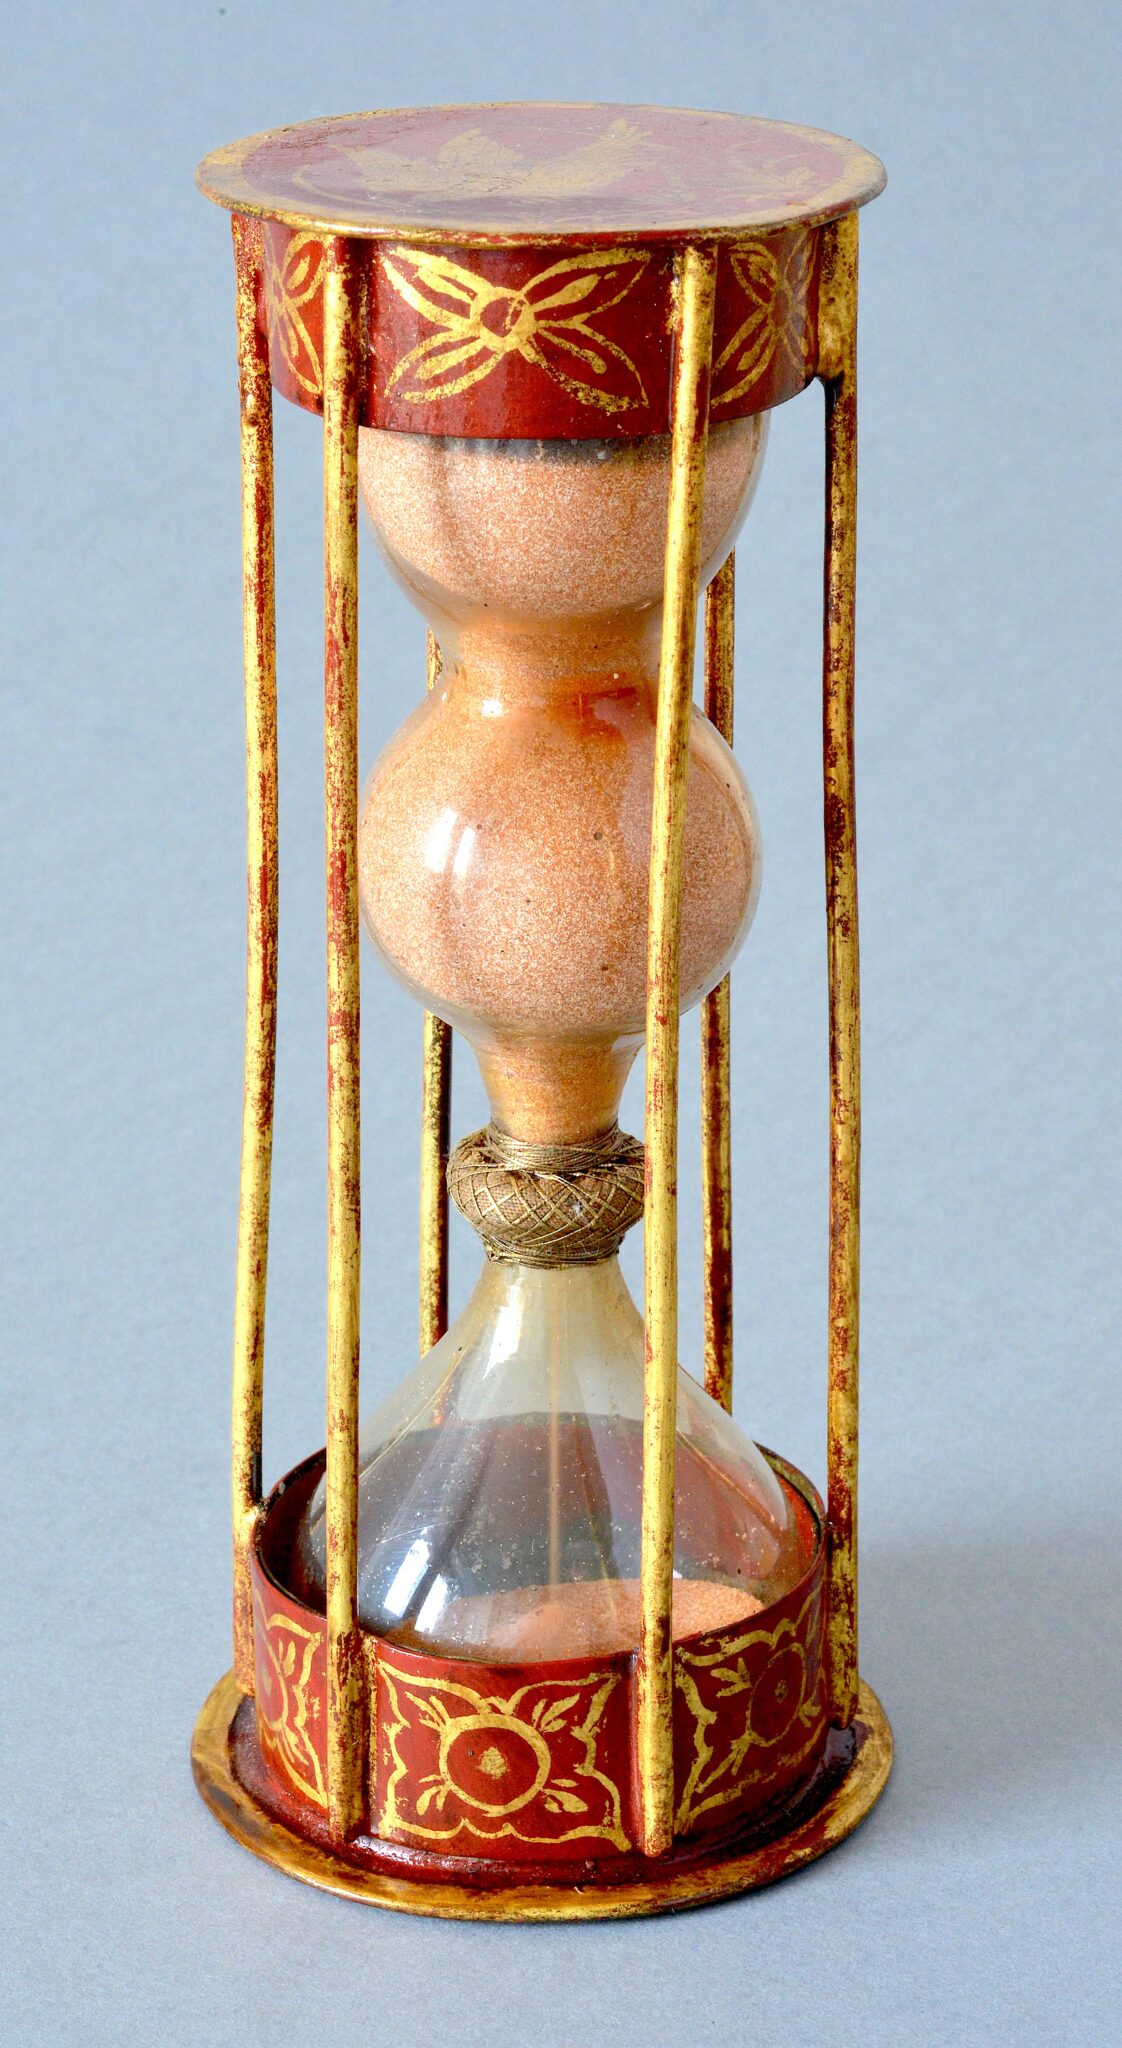 Hourglass in a red and gold painted metal frame made in France circa 1720/1730